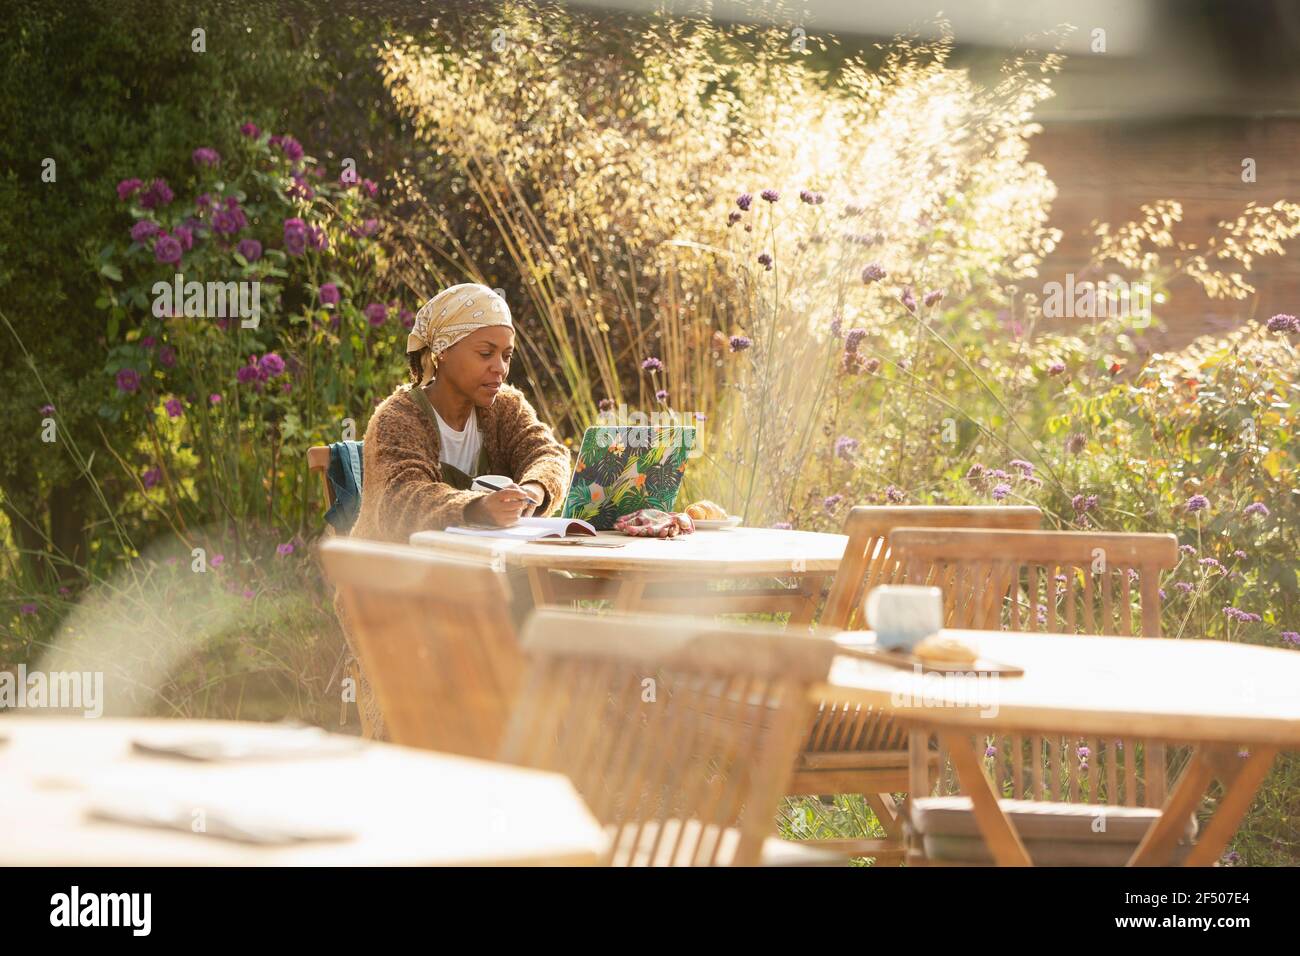 Woman working at laptop on sunny garden cafe patio Stock Photo